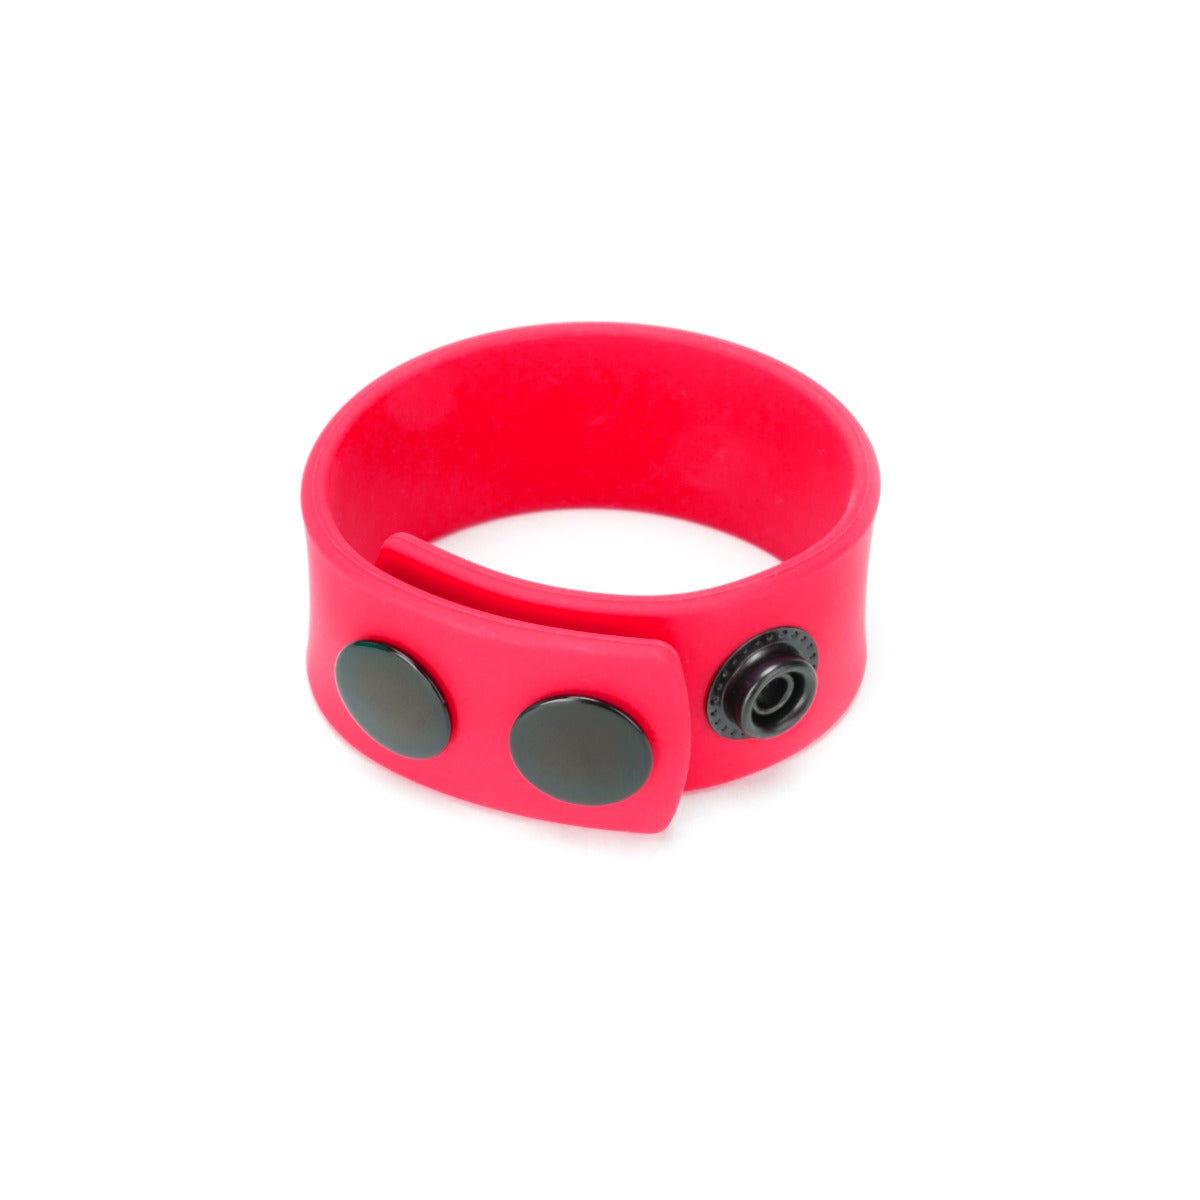 a red bracelet with two black circles on it